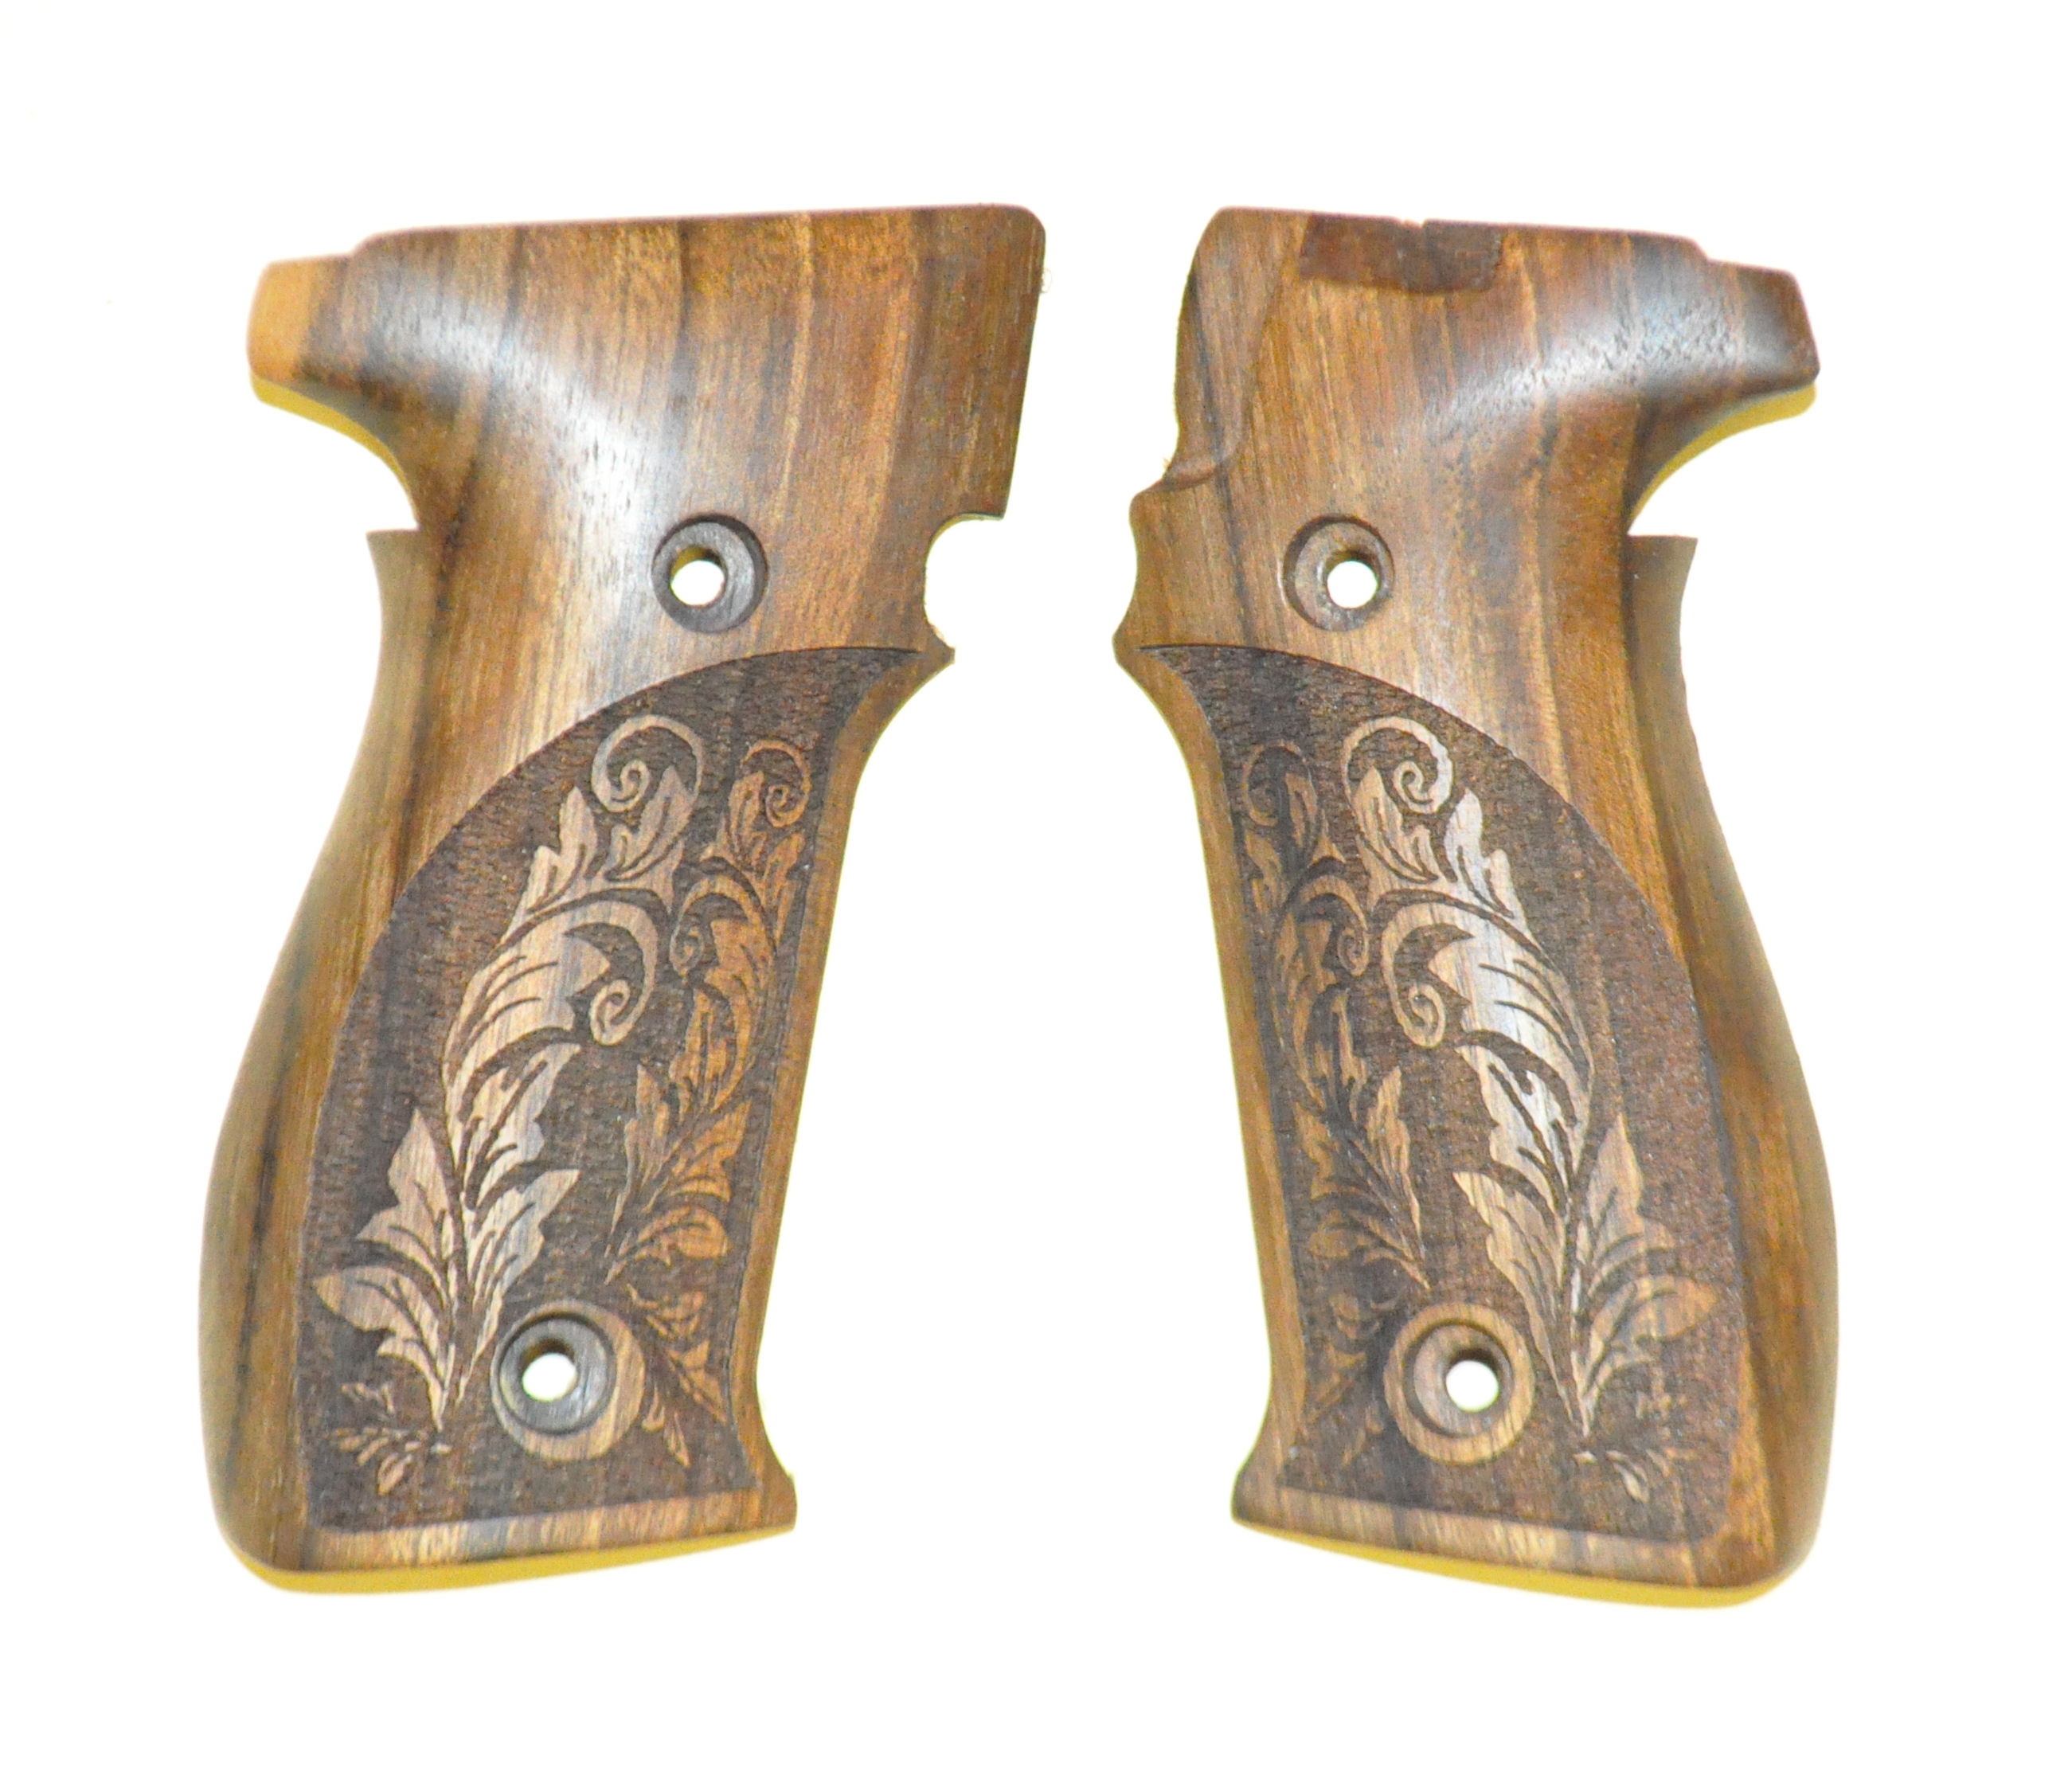 Sig 226 grips carving